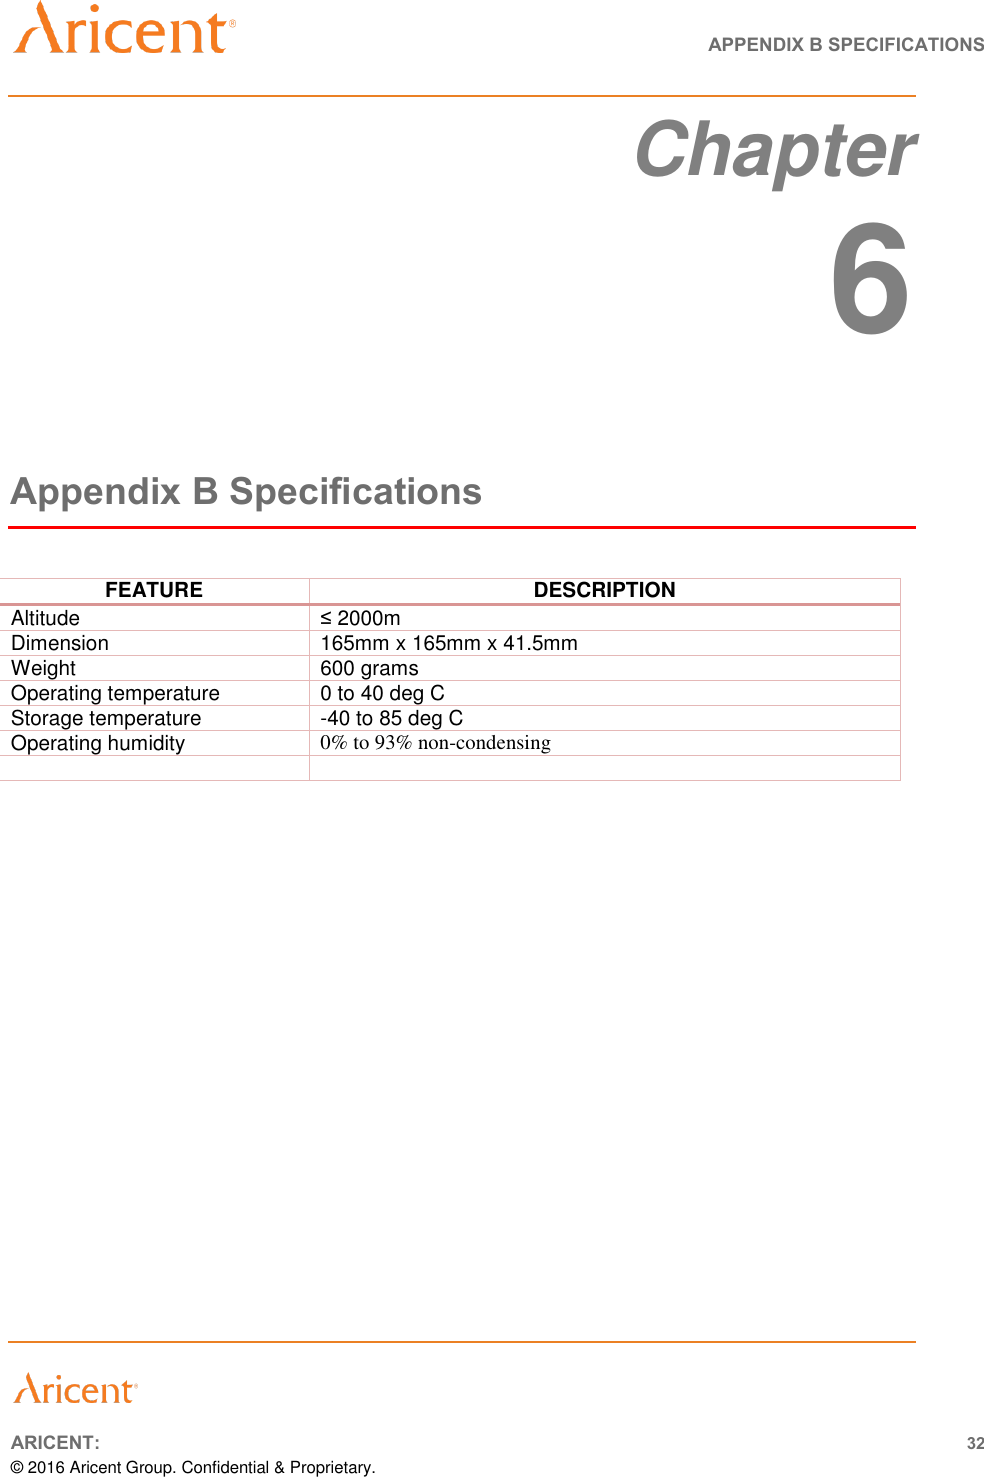   APPENDIX B SPECIFICATIONS       ARICENT: 32 © 2016 Aricent Group. Confidential &amp; Proprietary.  Chapter  6 Appendix B Specifications  FEATURE DESCRIPTION Altitude ≤ 2000m Dimension 165mm x 165mm x 41.5mm  Weight 600 grams Operating temperature 0 to 40 deg C Storage temperature -40 to 85 deg C Operating humidity 0% to 93% non-condensing        